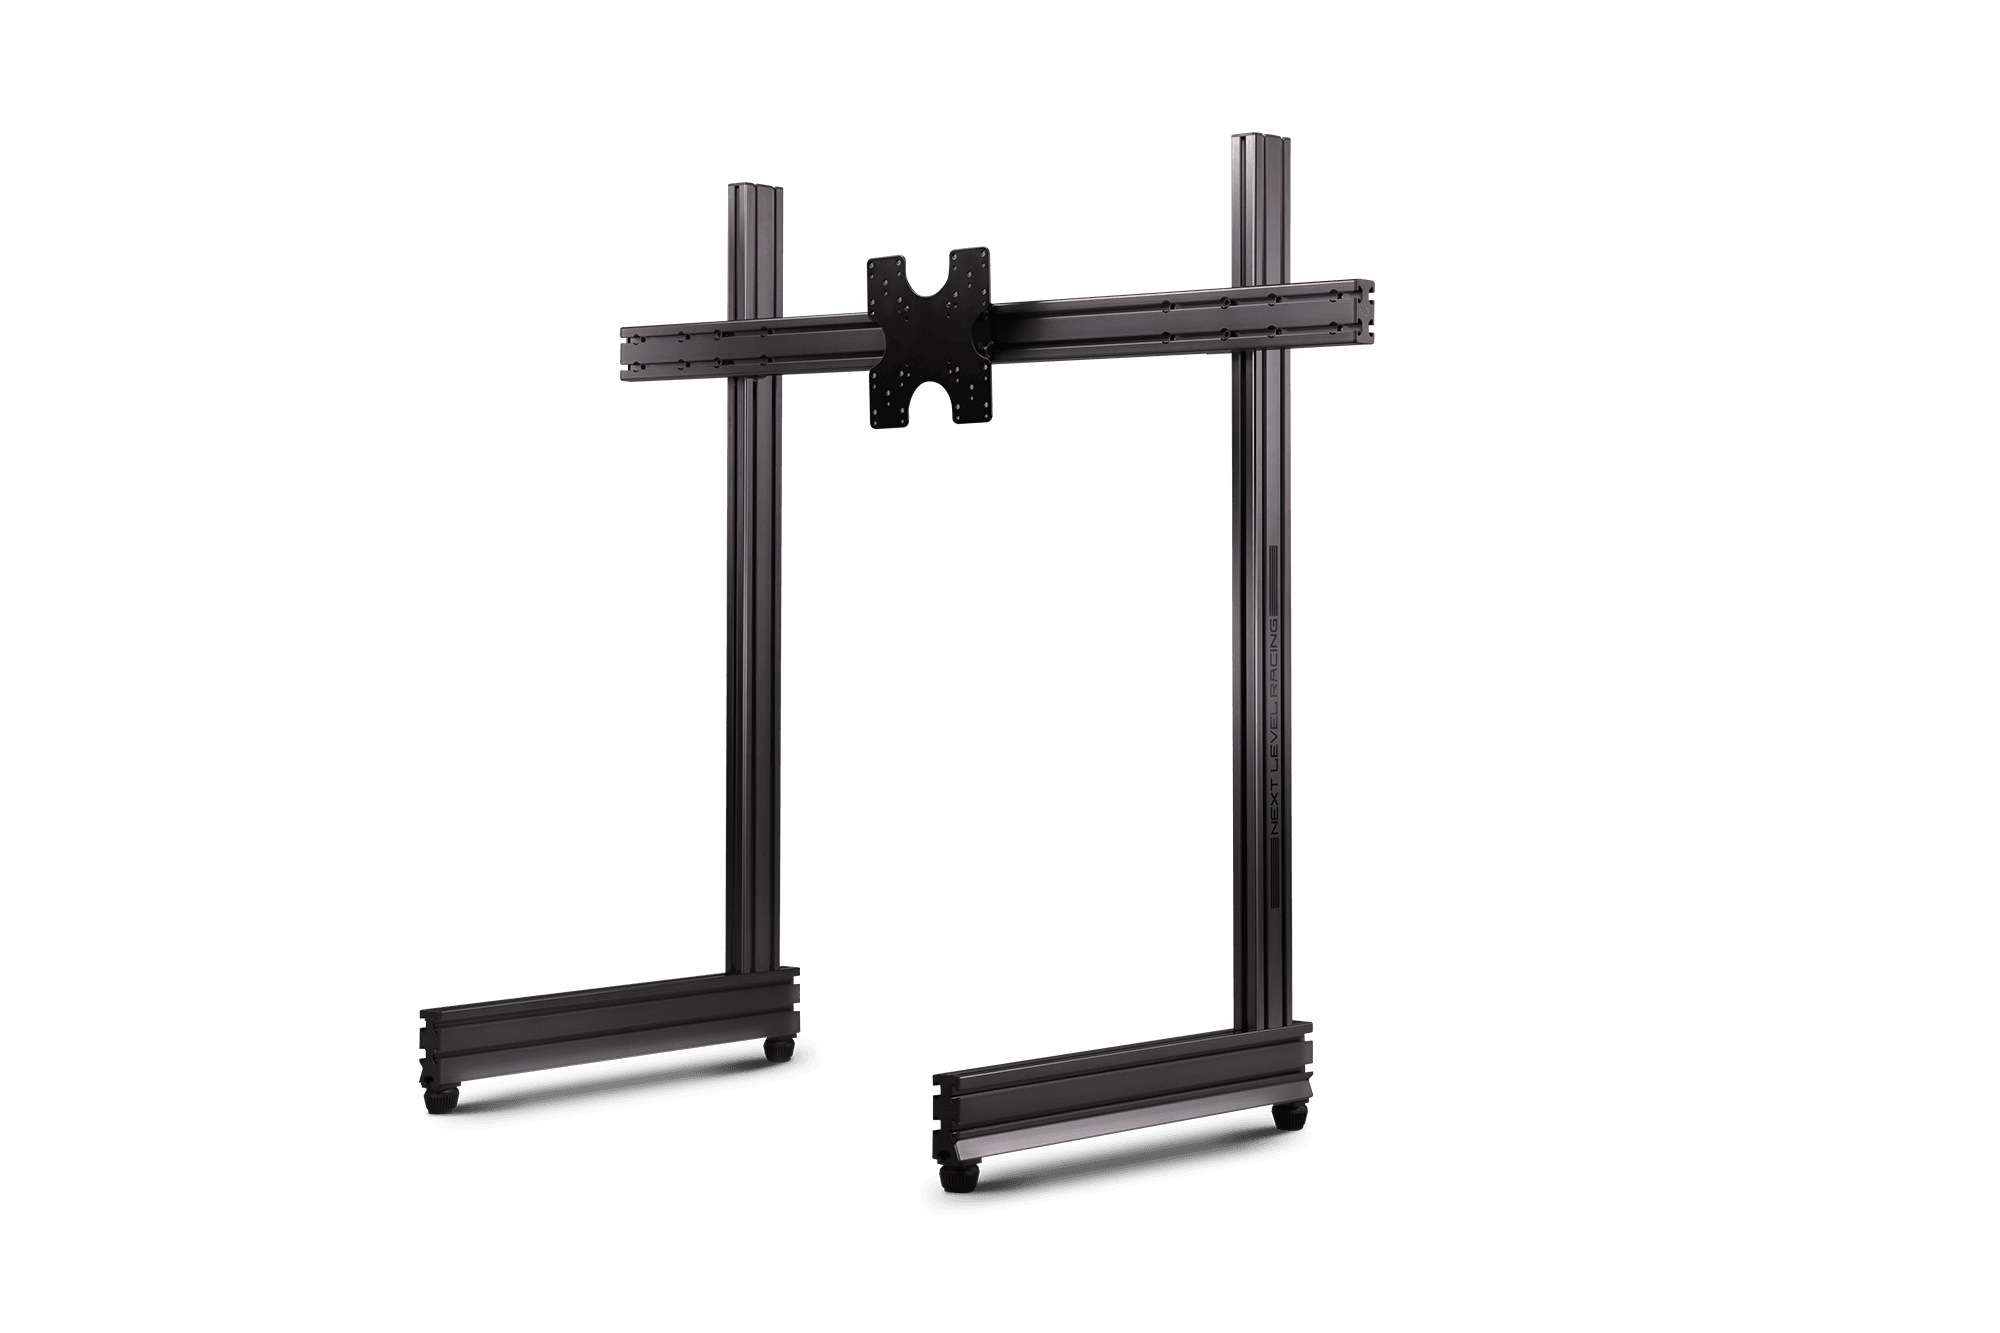 Buy Next Level Racing F-GT Elite Single Freestanding Monitor Stand ...